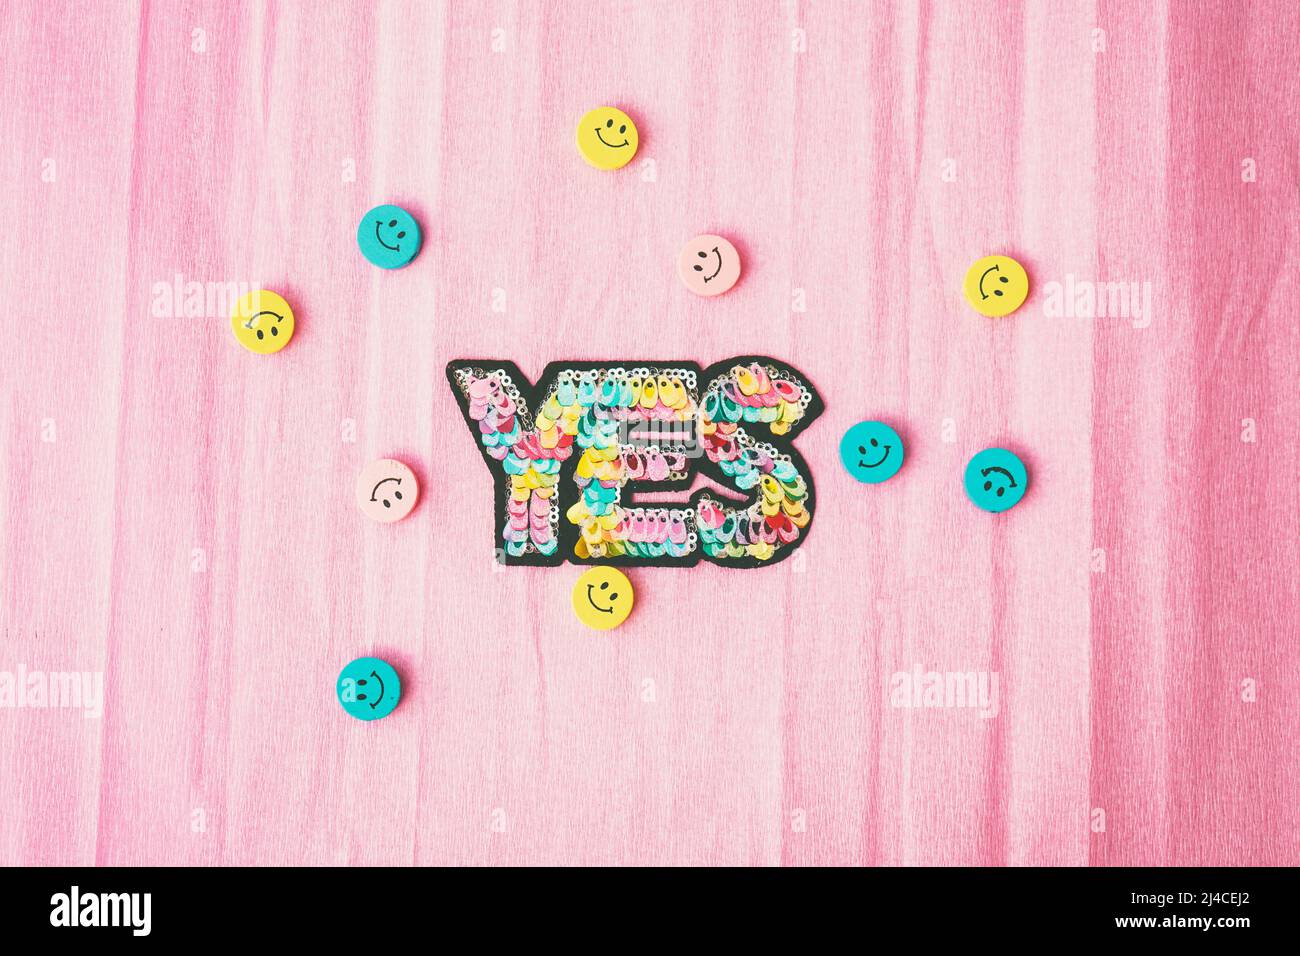 Word 'yes' make with colorful sequins and surrounded by smiley faces Stock Photo